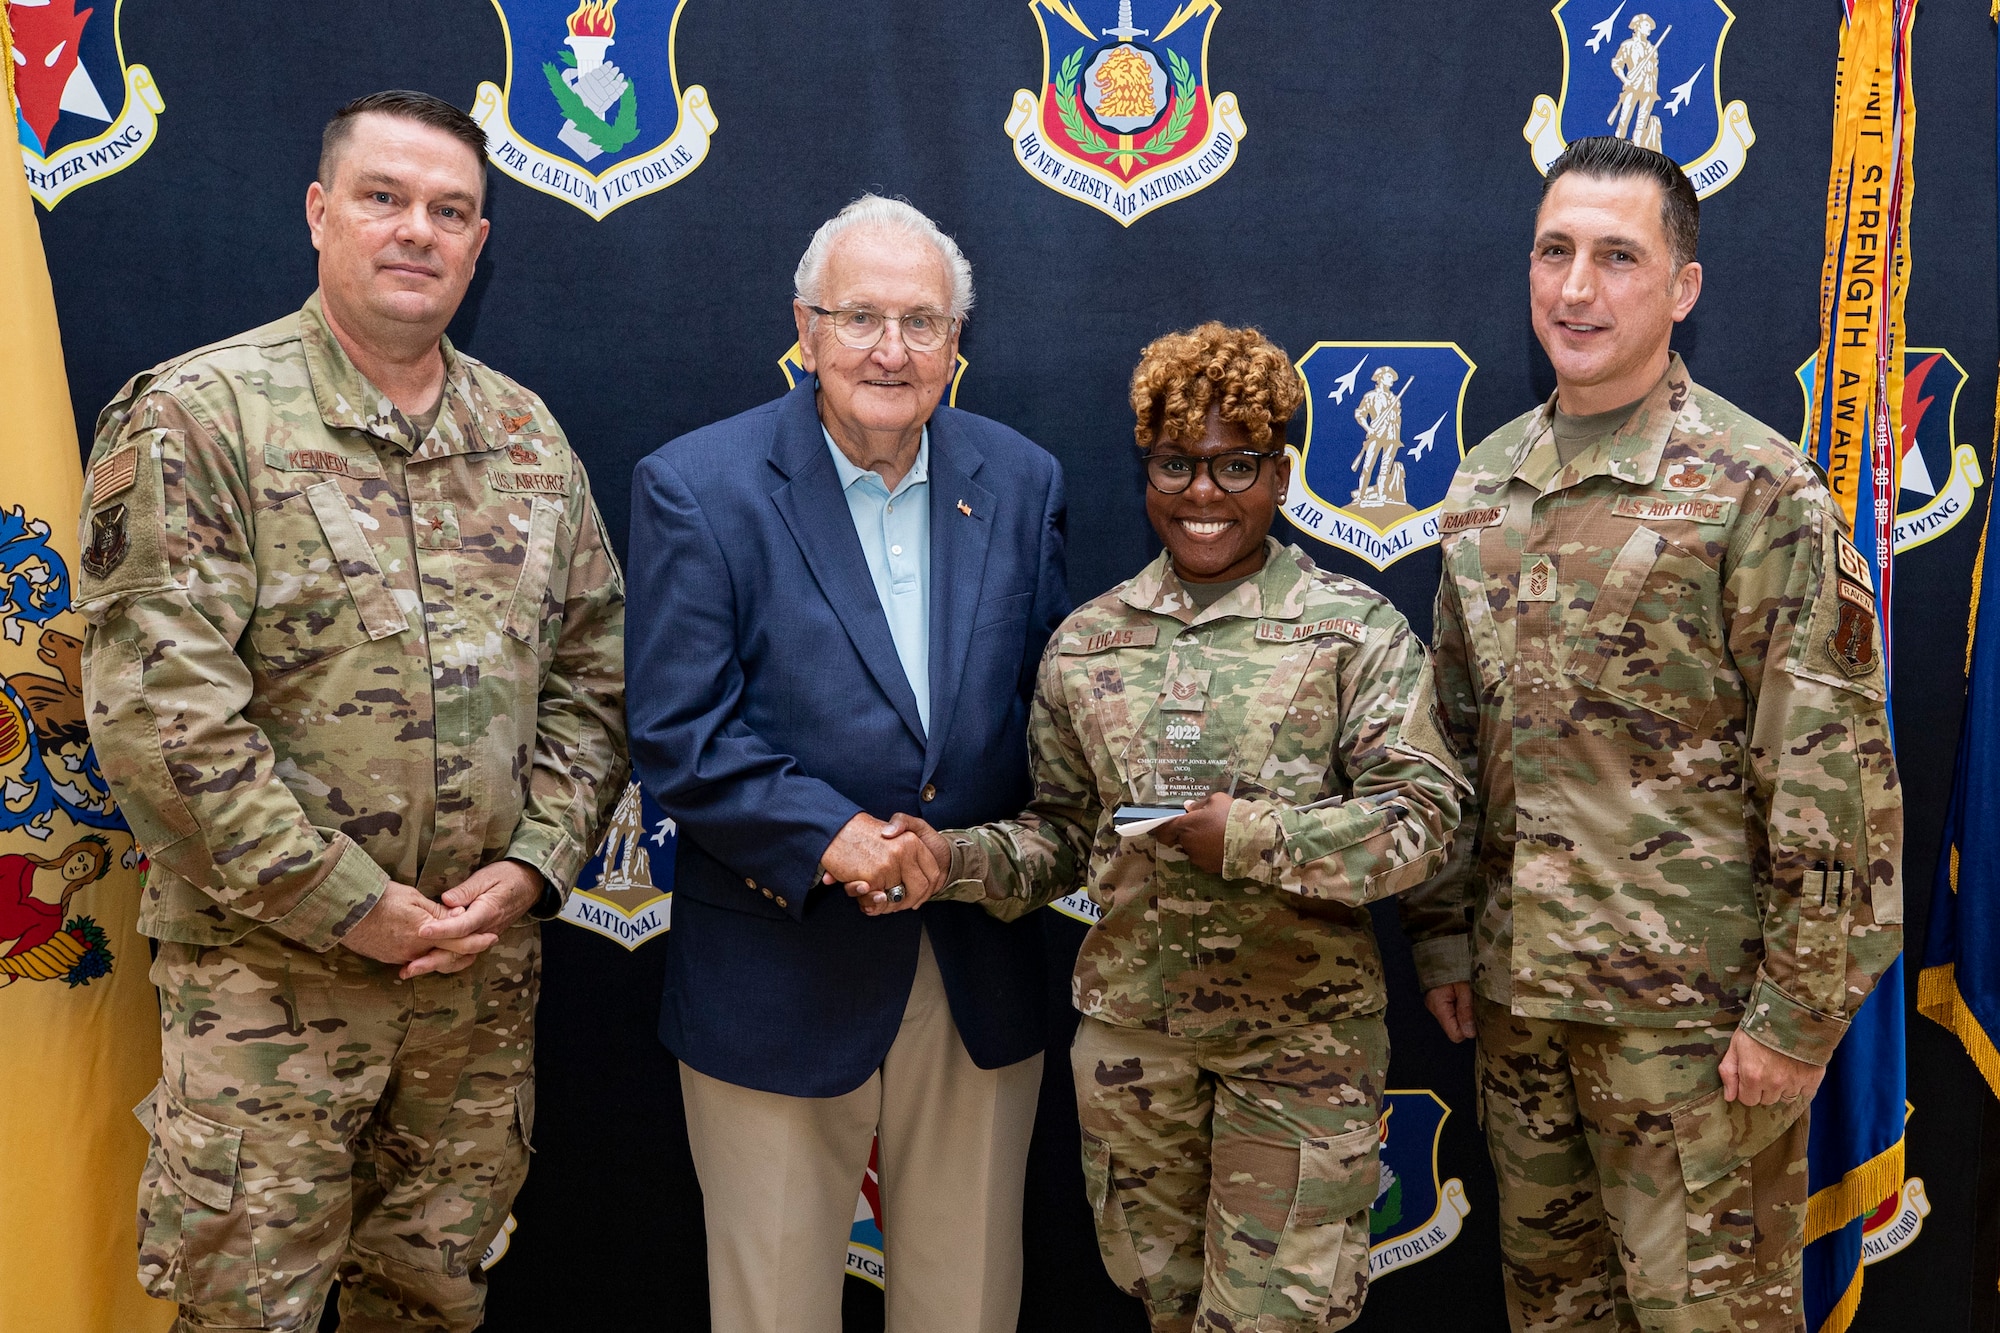 The New Jersey Air National Guard held their annual awards ceremony on Joint Base McGuire-Dix-Lakehurst, New Jersey, June 22, 2022. Tech. Sgt. Paidra Lucas, 227th Air Support Operations Squadron, is presented with the 2021 CMSgt Henry "J" Jones Award by Brig. Gen. (Ret.) Robert Dutko, Brig. Gen. Patrick Kennedy and State Command Chief Master Sgt. Michael Rakauckas.